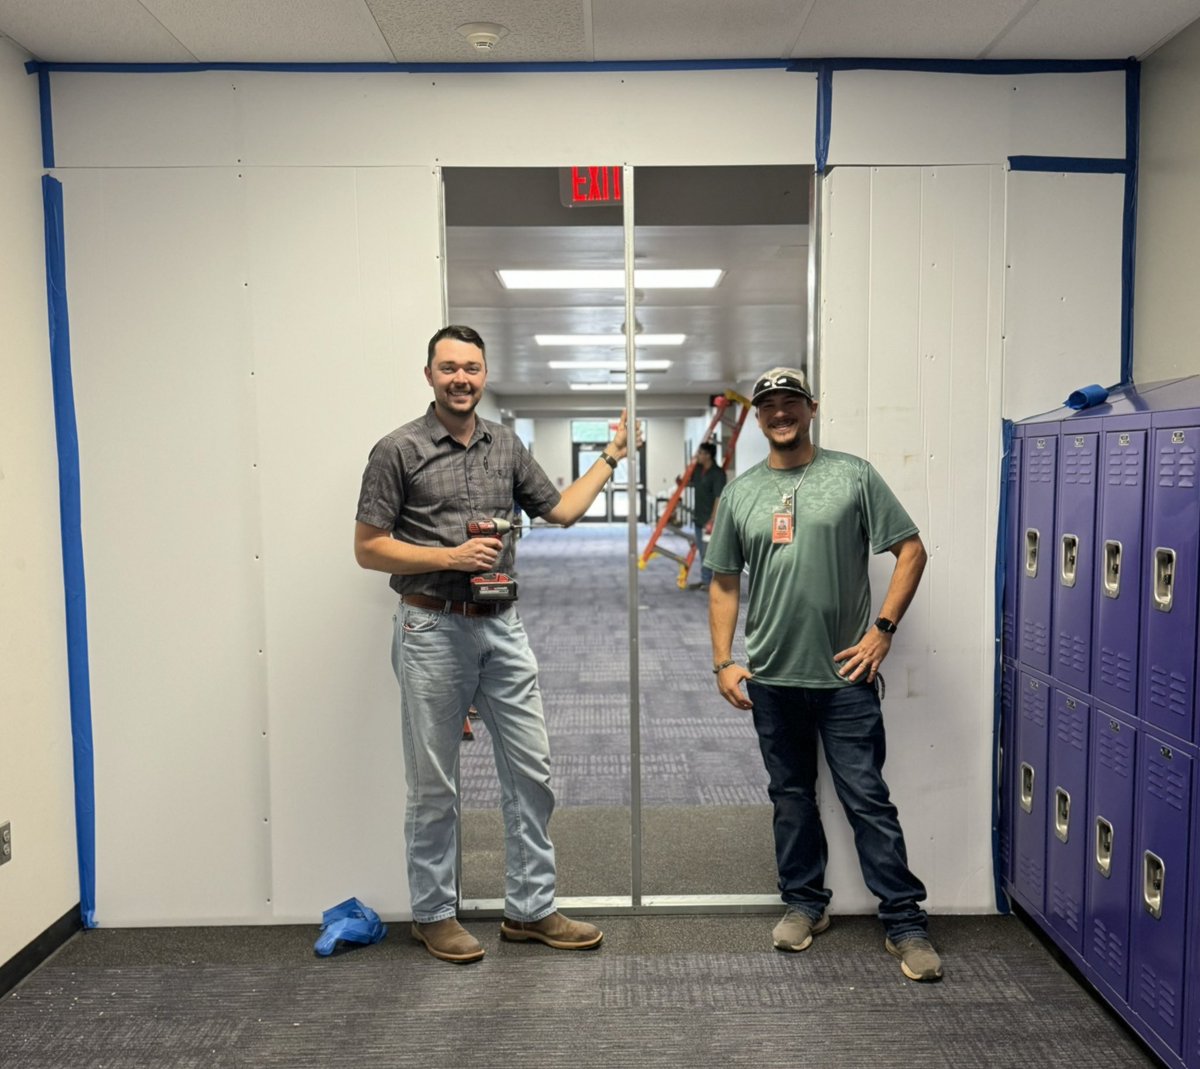 We are 1️⃣ school day away from being in this new space! The students got SO excited to see how beautiful it is. These two men have worked incredibly hard to get our campus ready. Not gonna lie…they are doing to miss us when this project done. 💜 @MDJH_Panthers